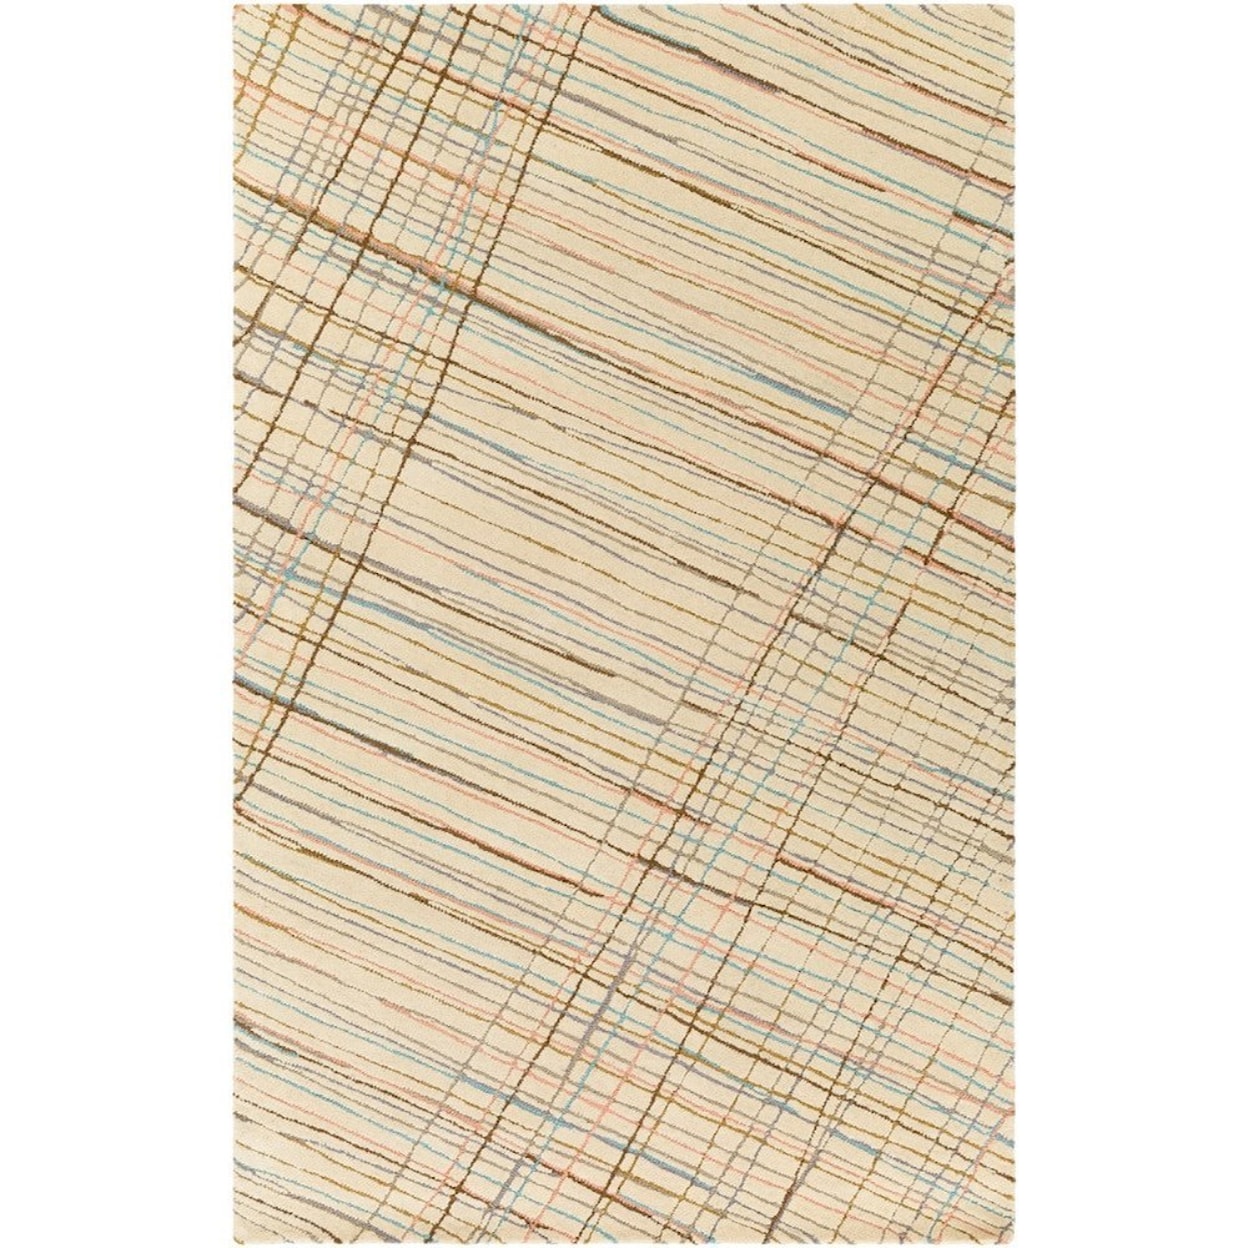 Ruby-Gordon Accents Flying Colors 2' x 3' Rug